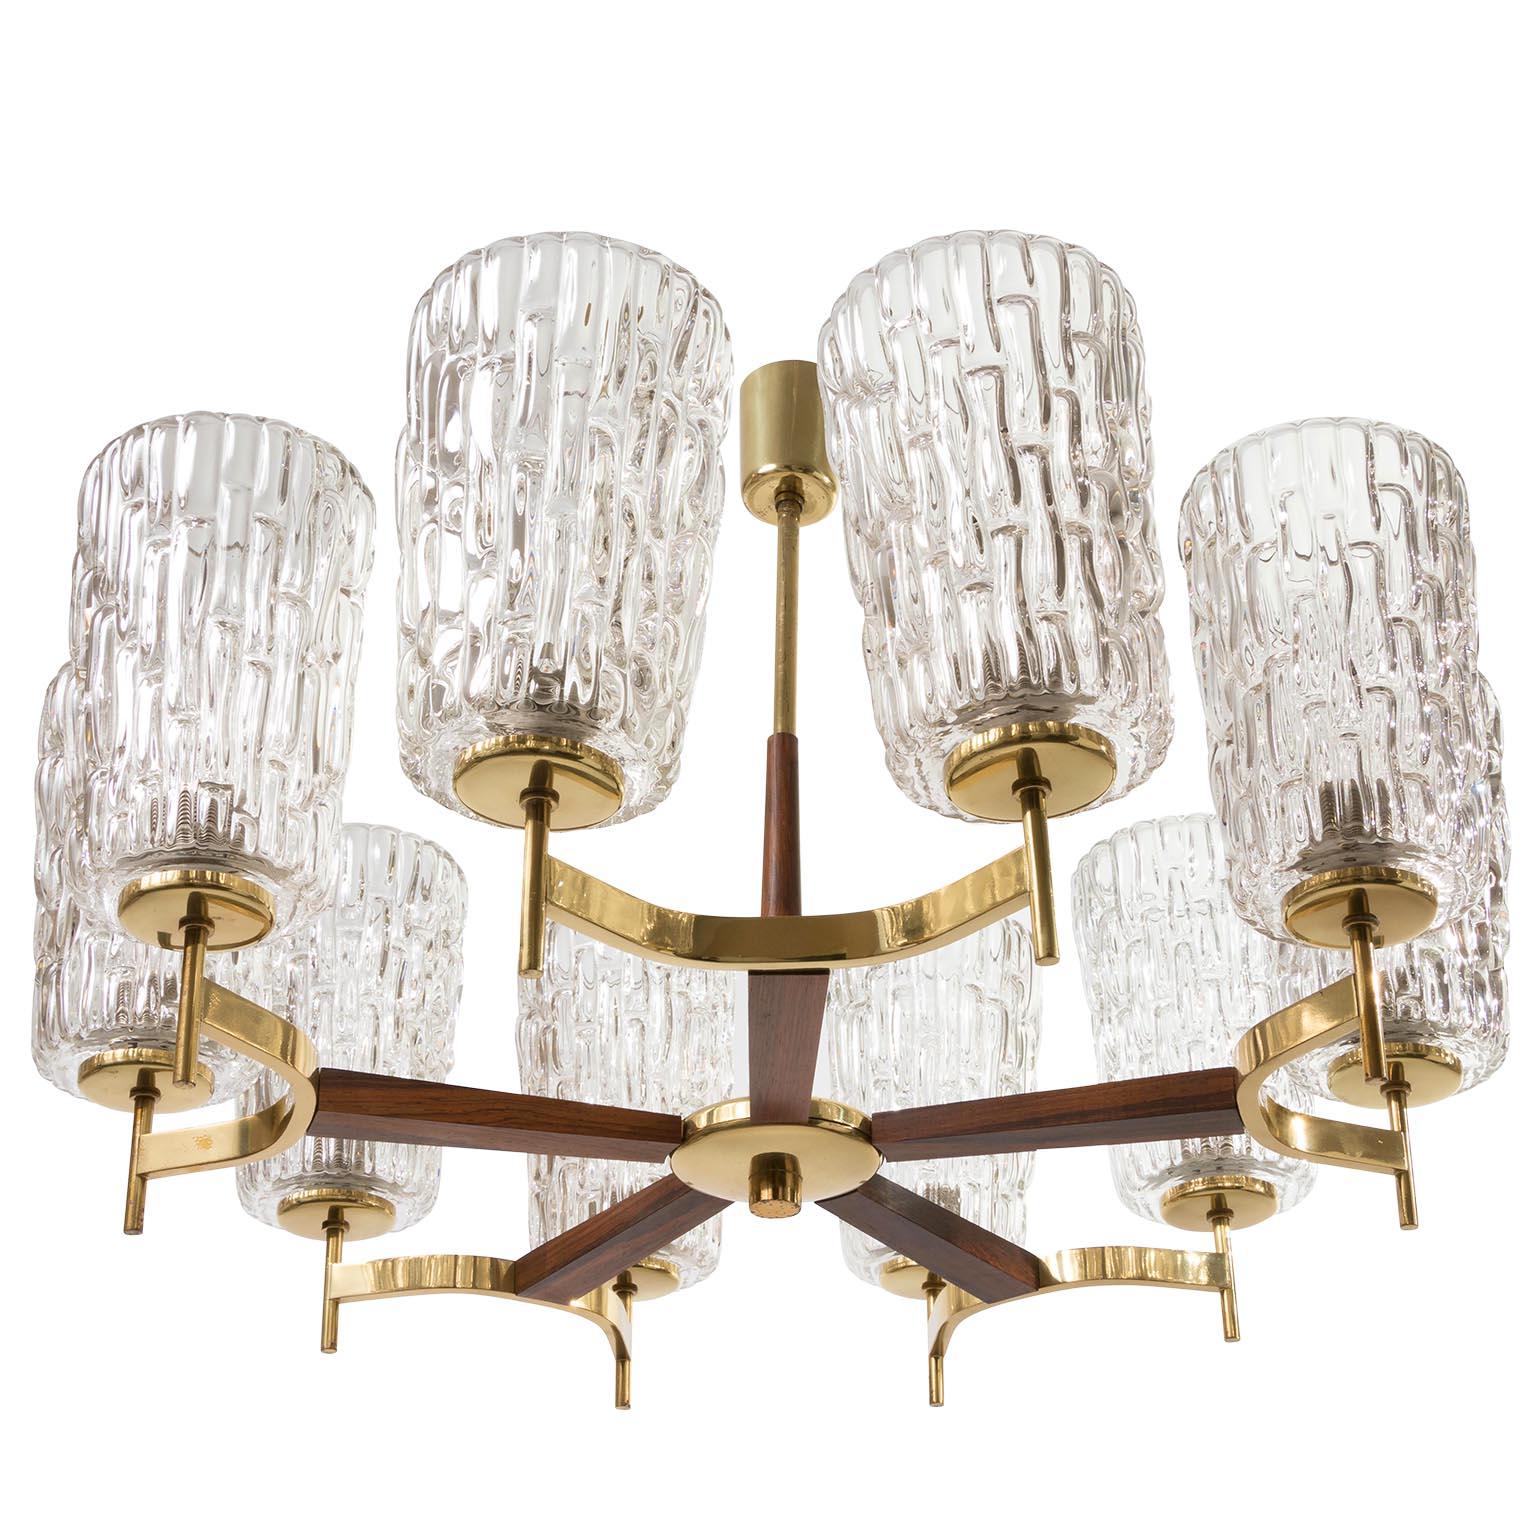 Mid-Century Modern Two Large Chandeliers by Rupert Nikoll, Brass Wood and Glass, Austria, 1960